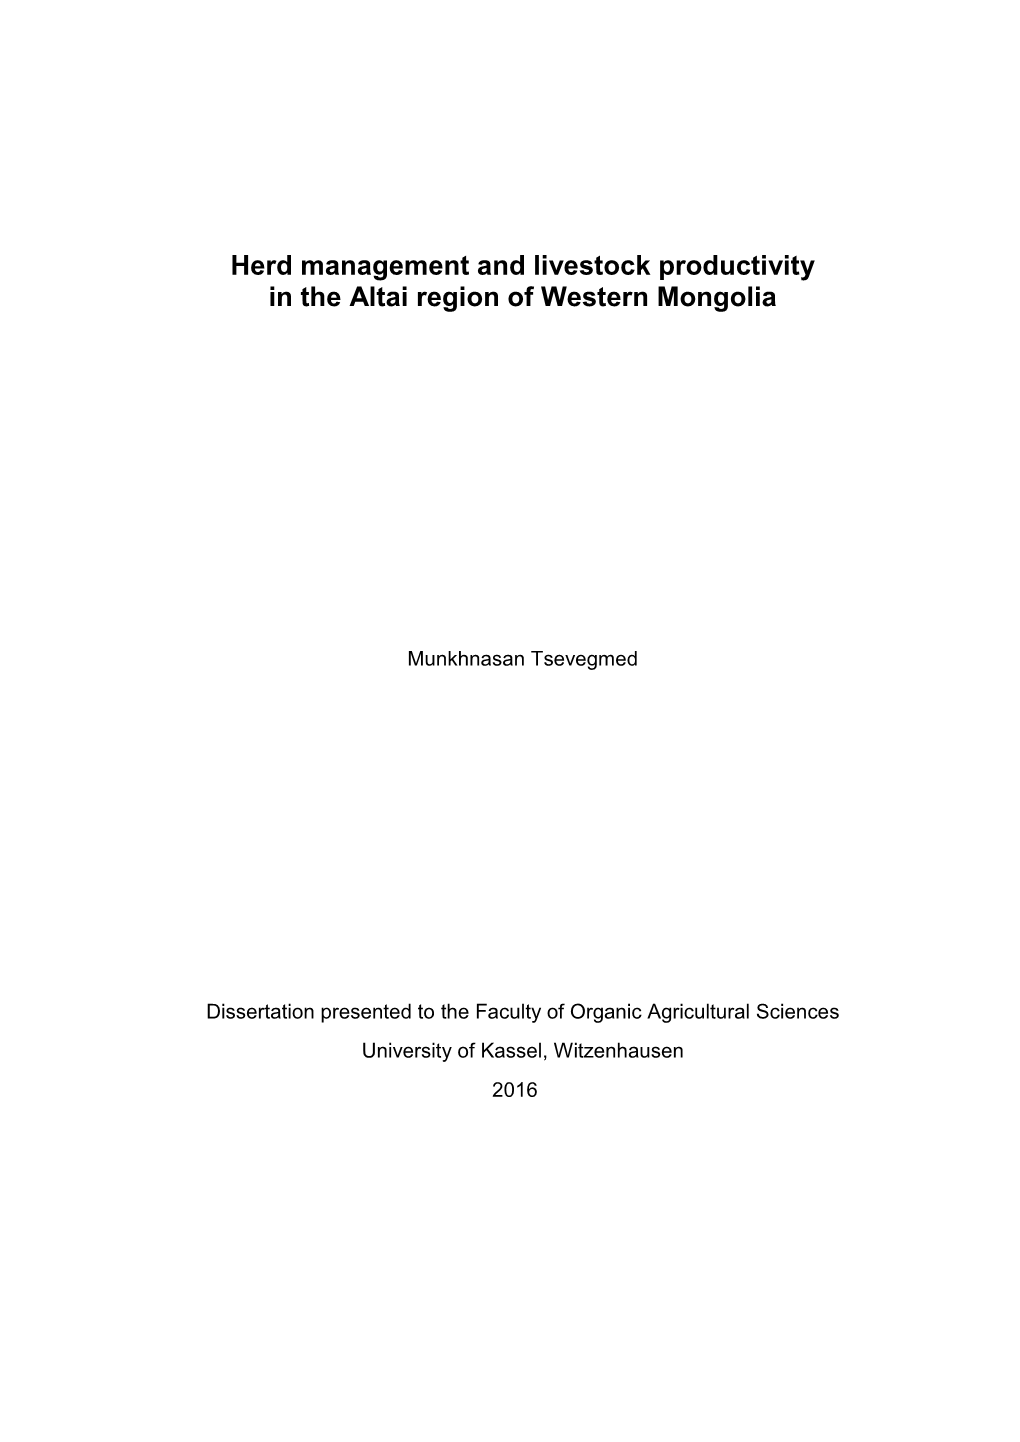 Herd Management and Livestock Productivity in the Altai Region of Western Mongolia